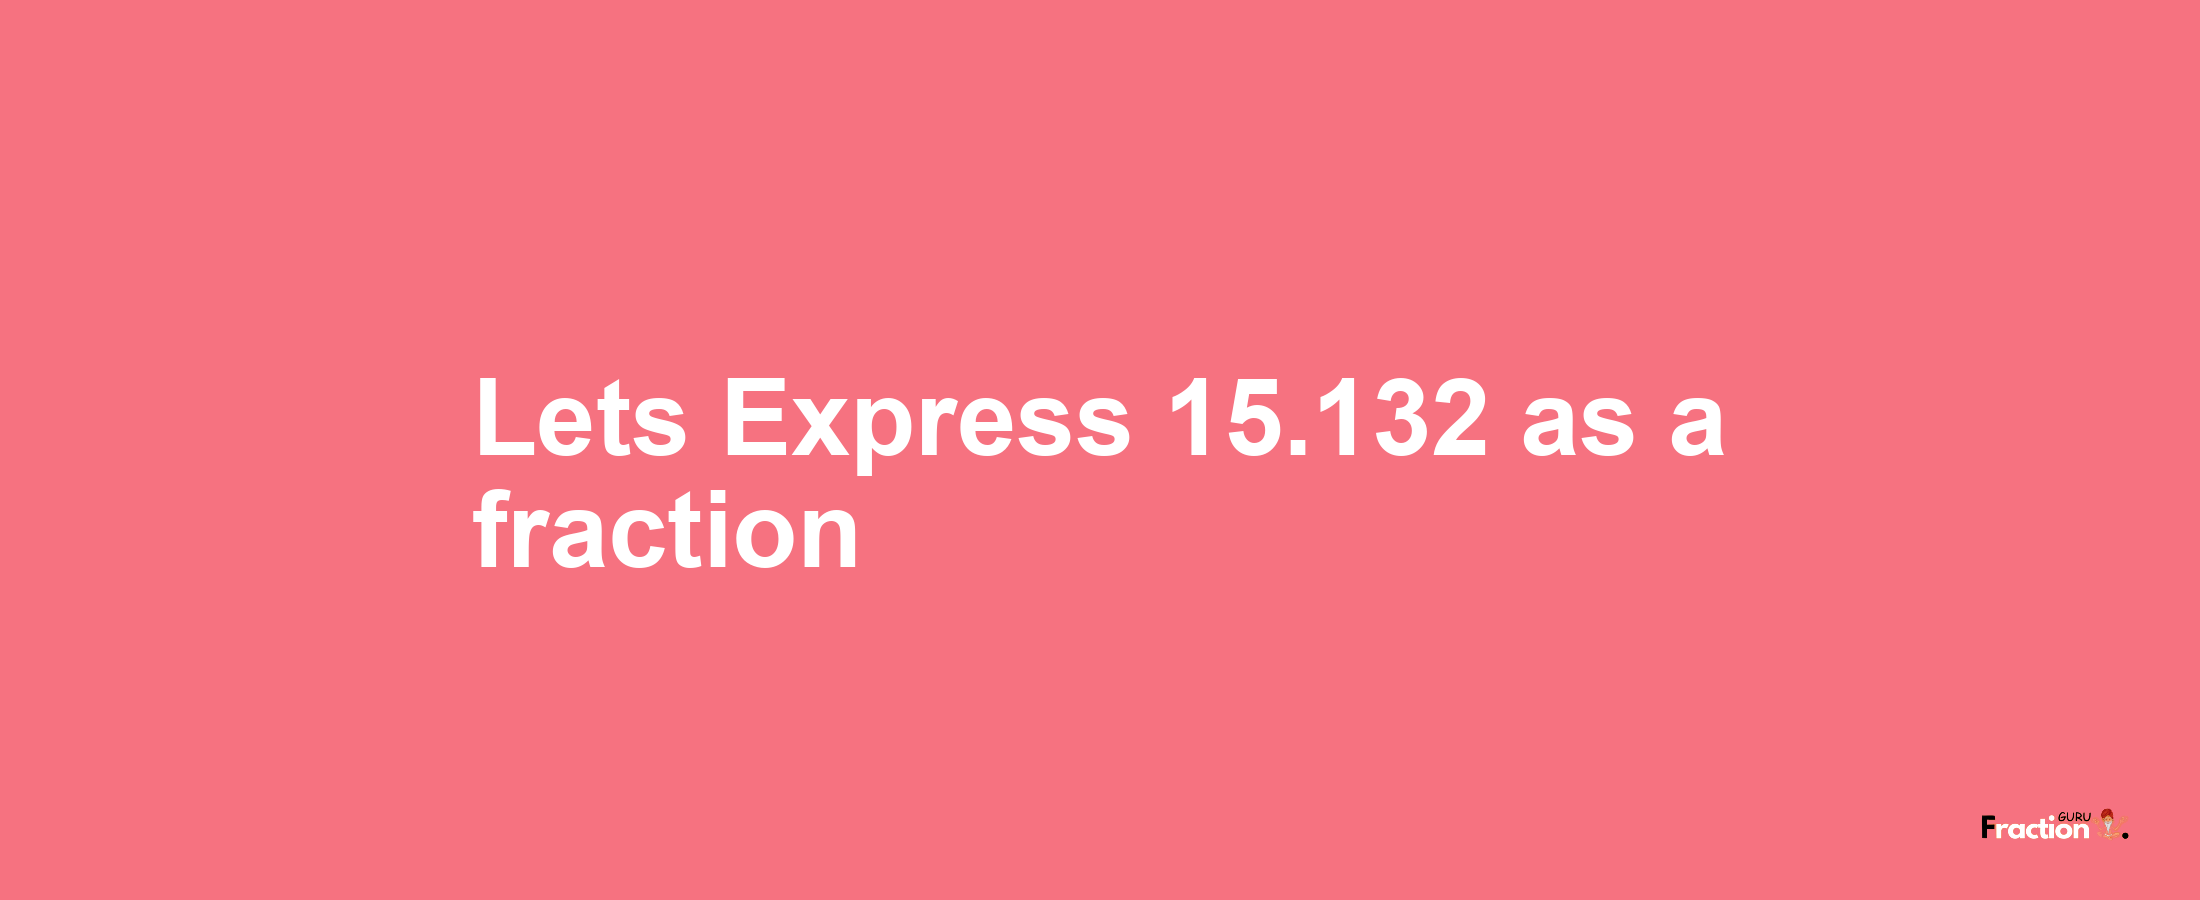 Lets Express 15.132 as afraction